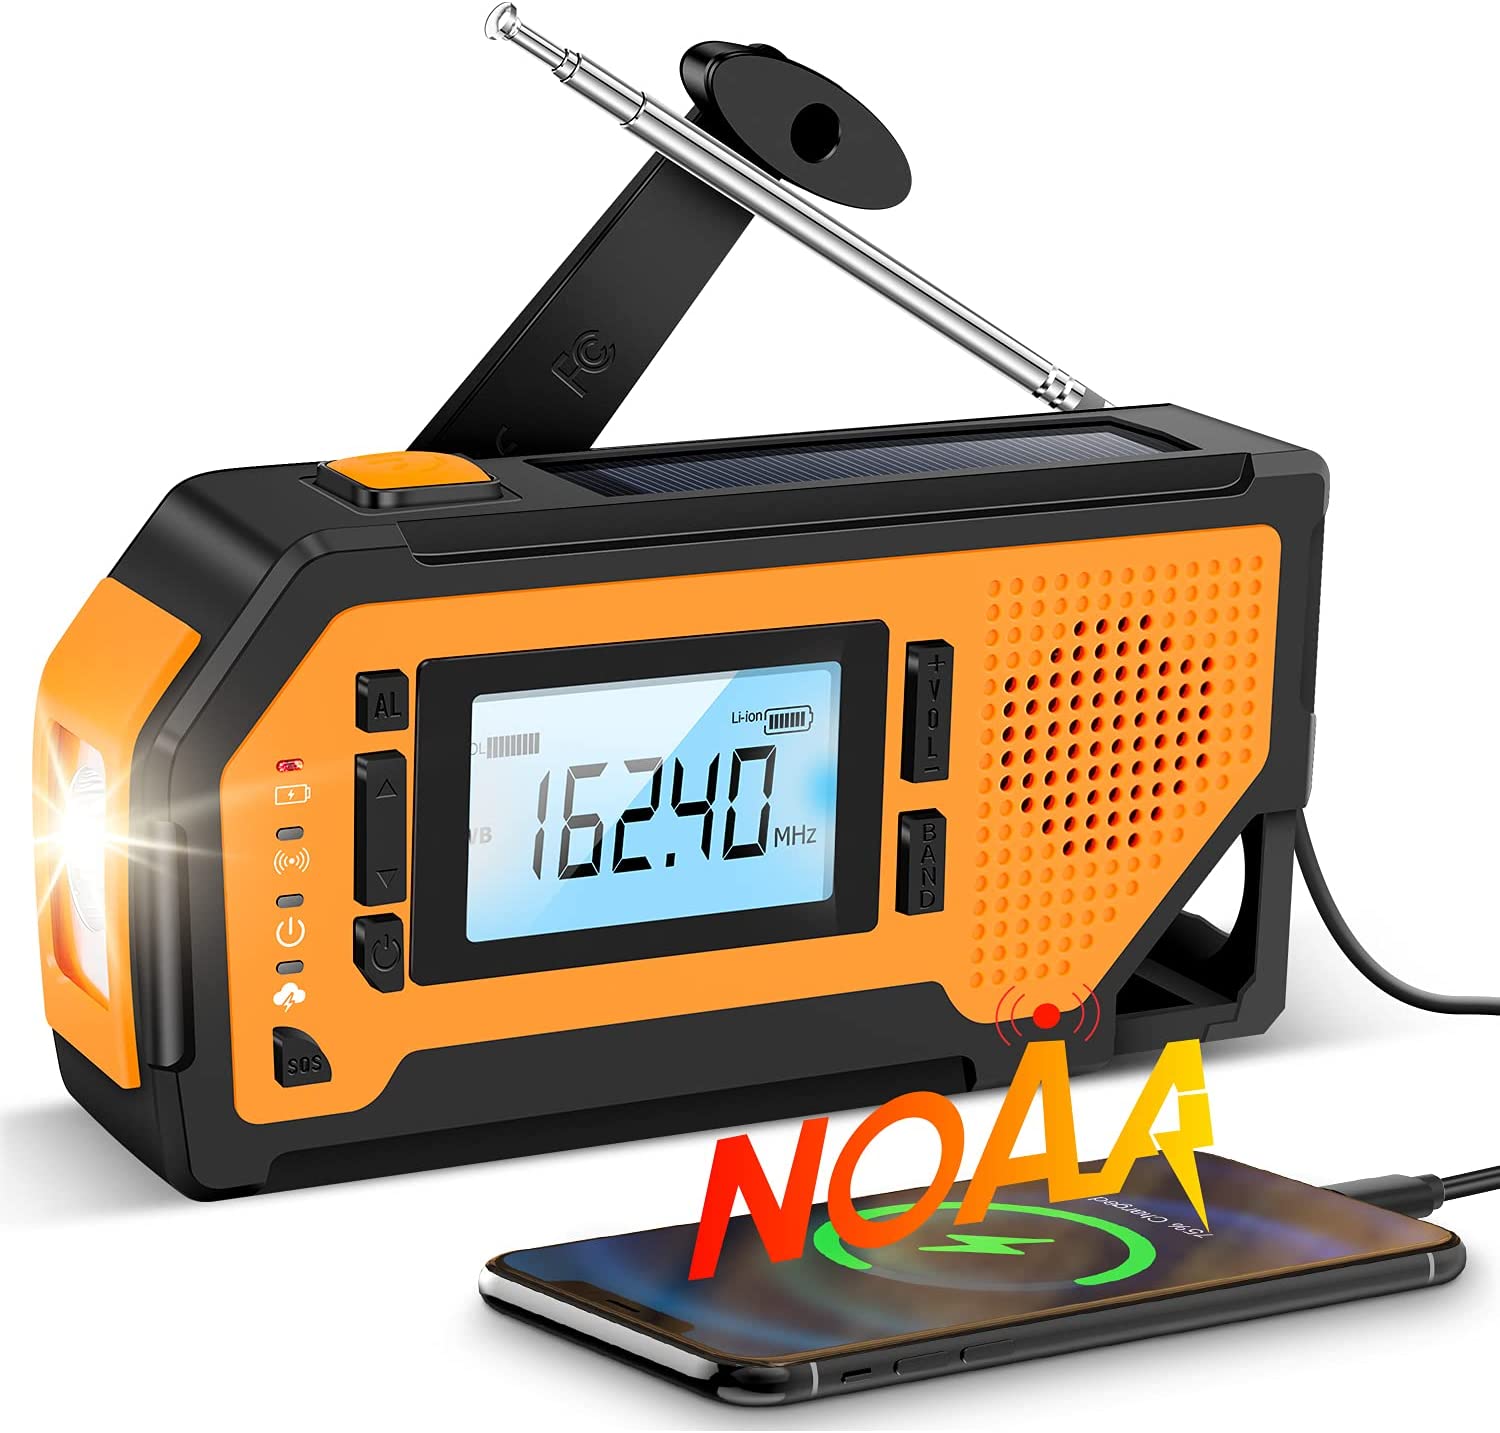 EcomXia Emergency Solar Hand Crank Radio – Portable AM/FM/NOAA Weather Radio, Battery Powered Radio with Cell Phone Charger | Flashlight | SOS Alarm | Reading Lamp, Weather Radios for Home Outdoor